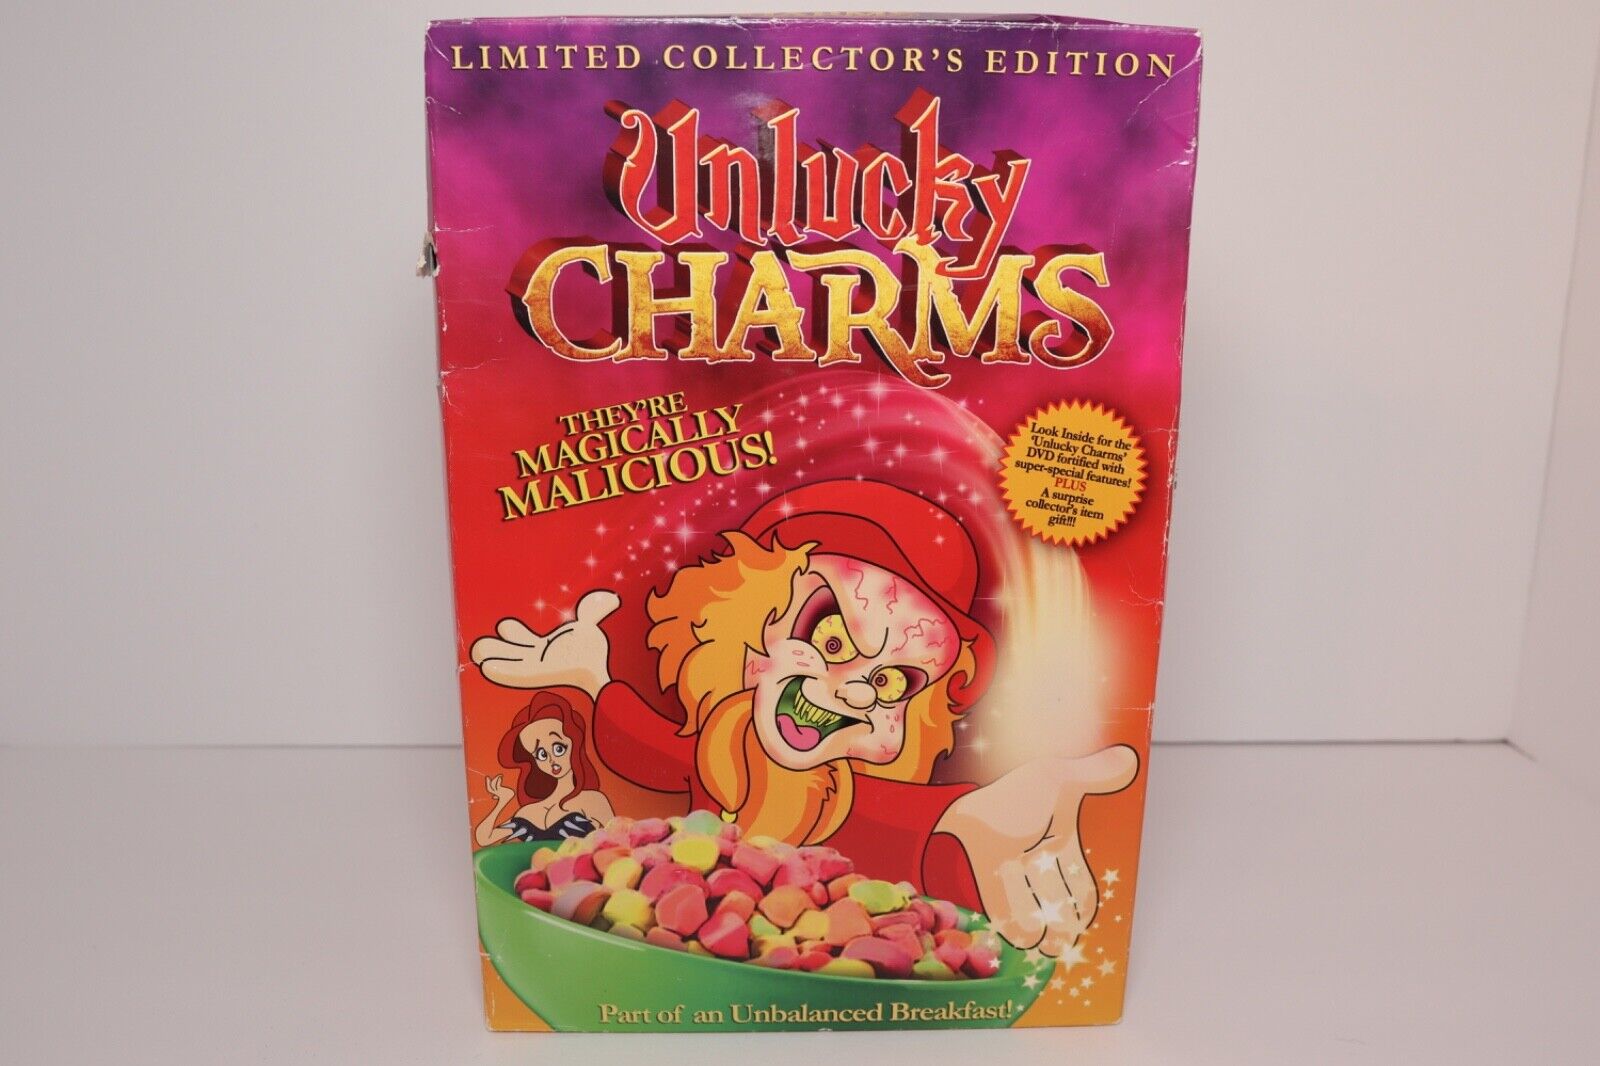 Limited Collector\'s Edition Unlucky Charms Unopened Complete Cereal Box with DVD